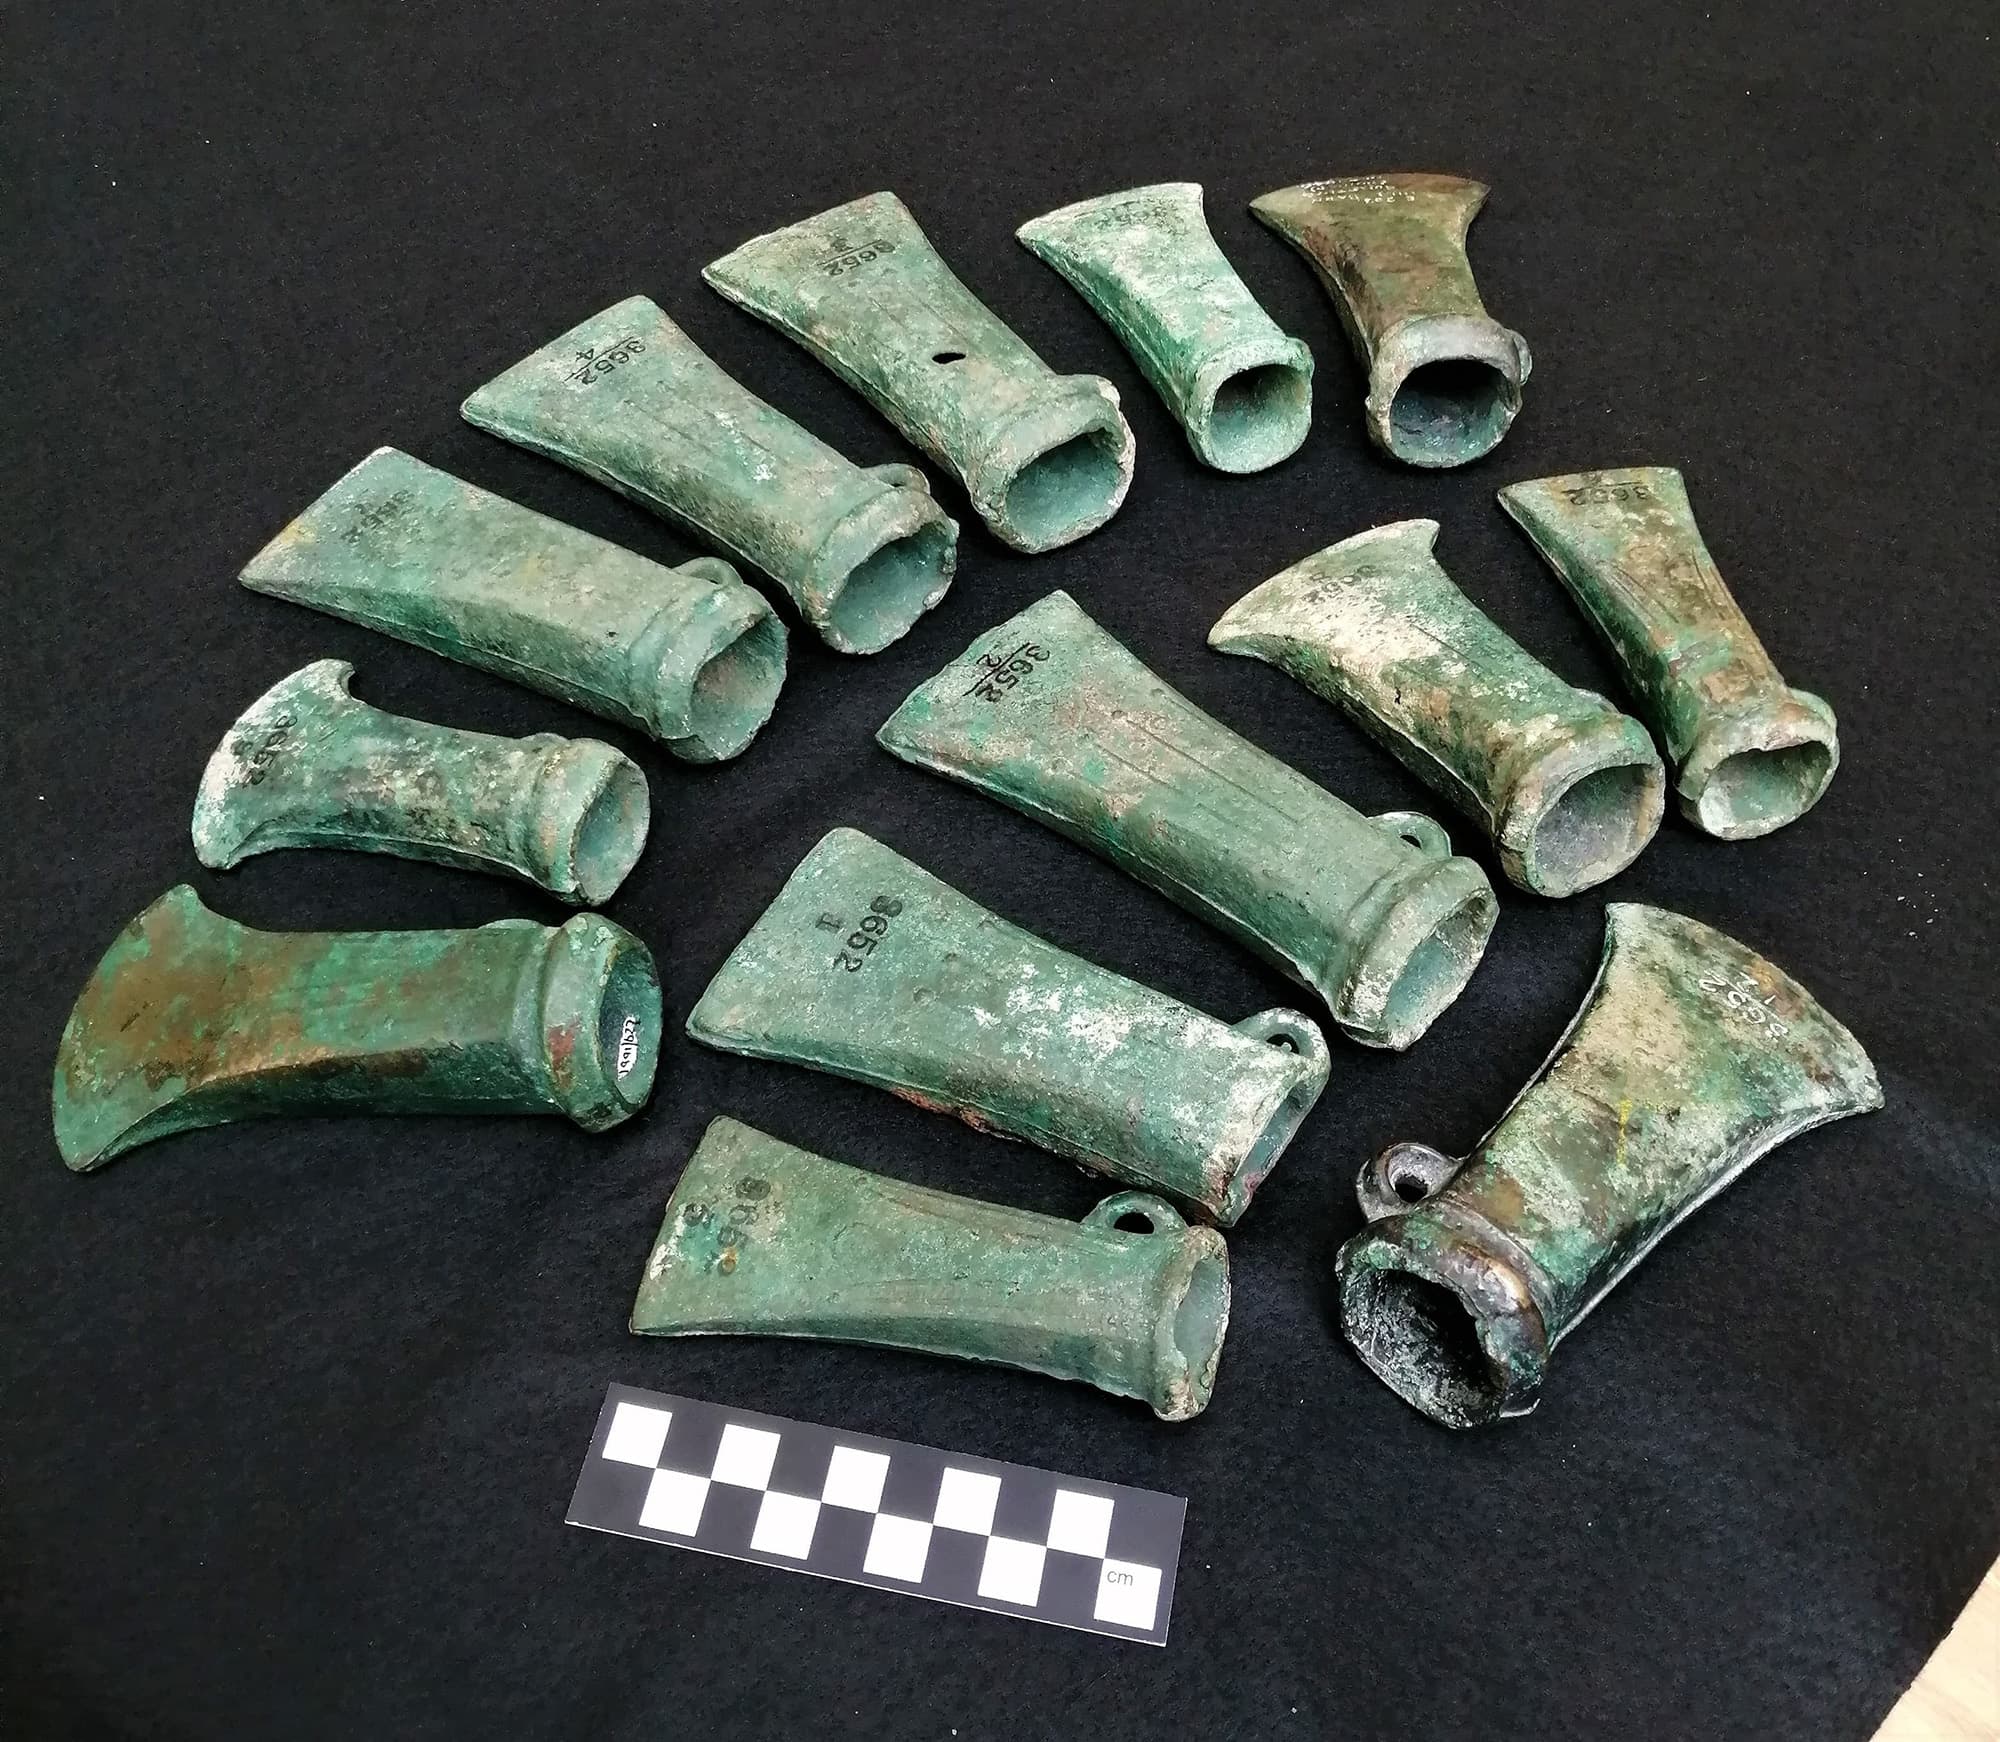 Metal Conservation – The Sompting Hoard